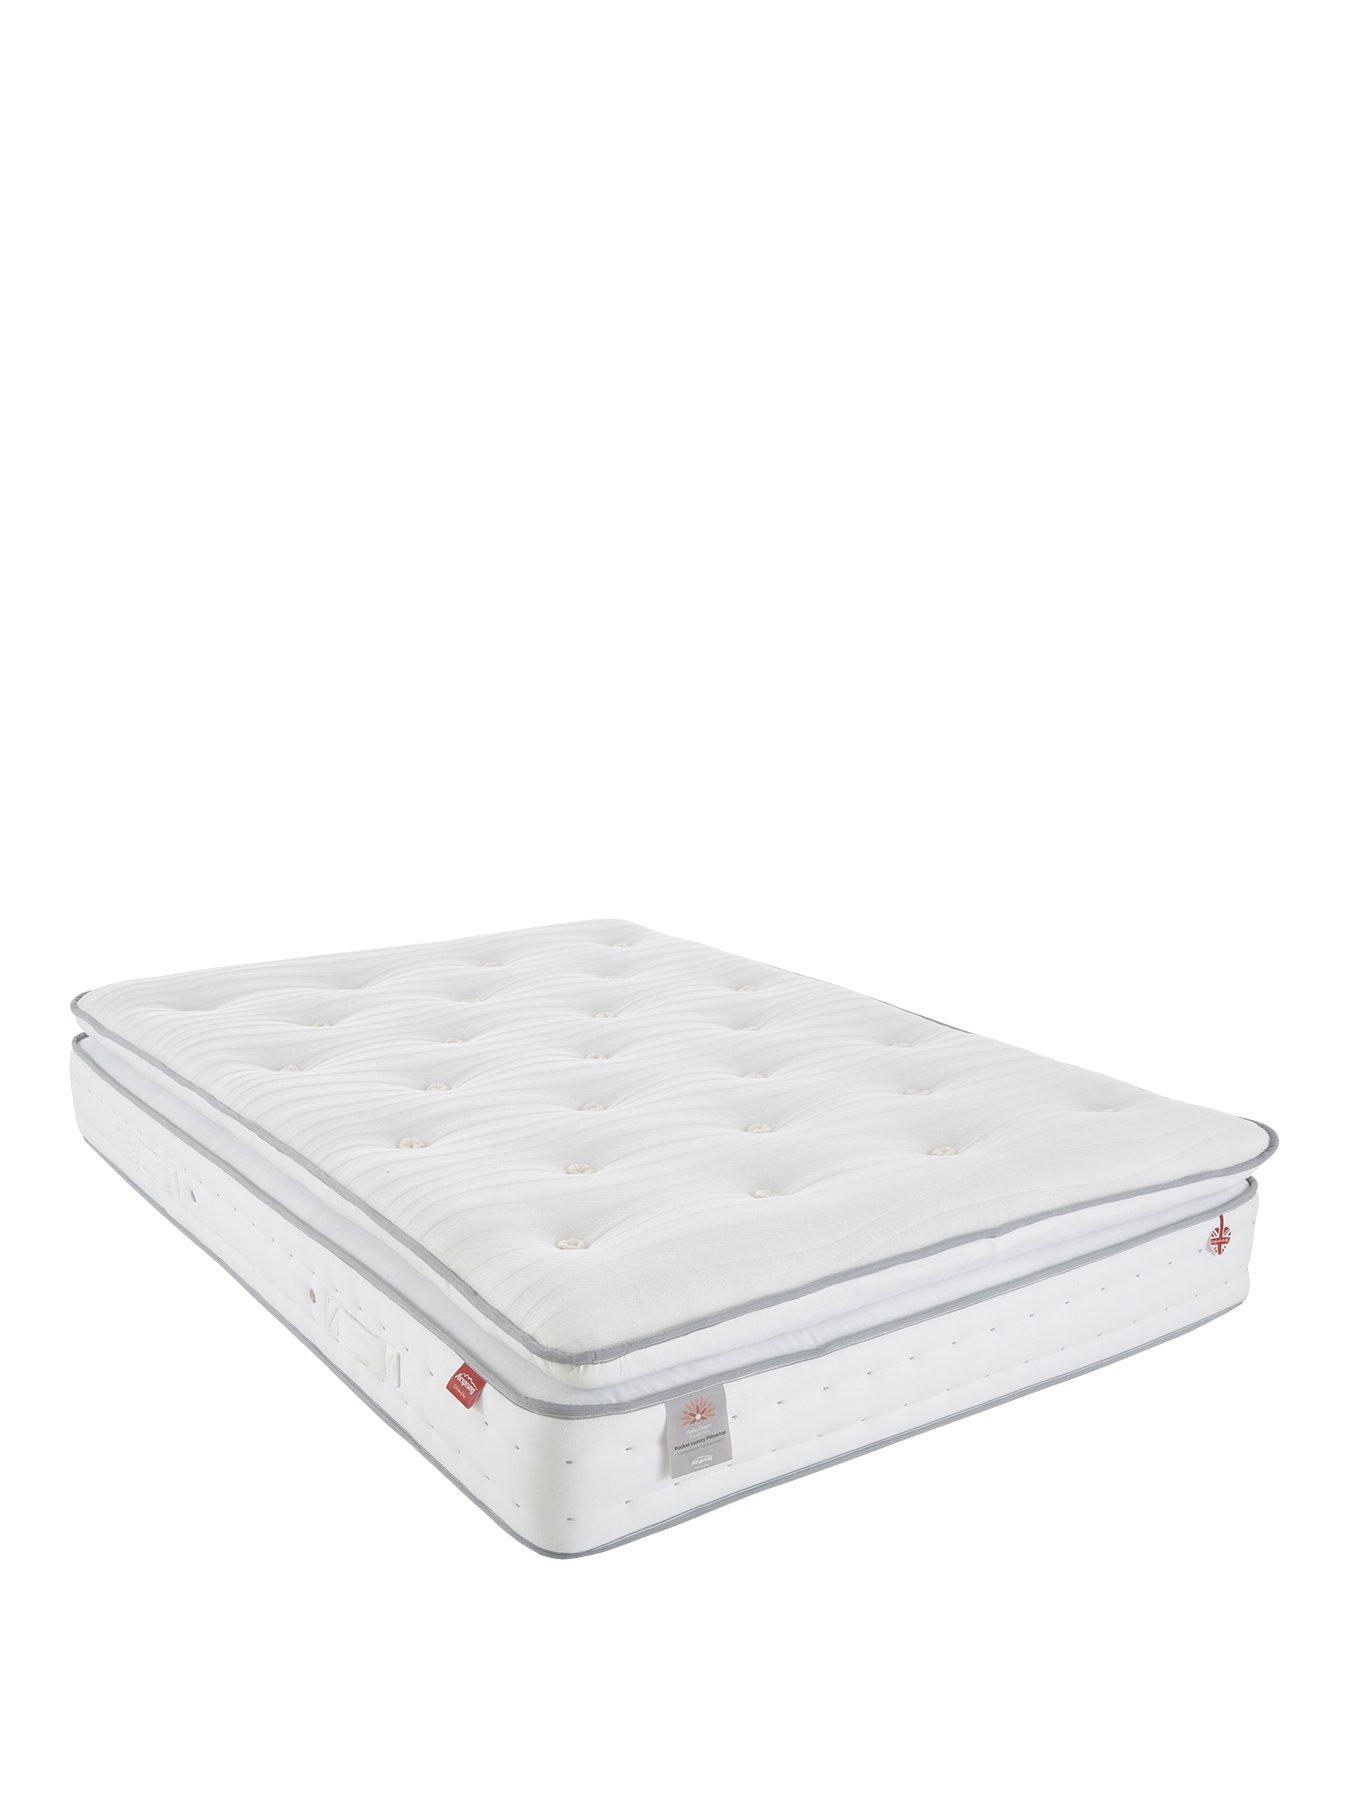 90cm x 190cm 3ft Single Revive Direct Premium Quality Quilted Open Coil Spring Mattress with Breathable Border 